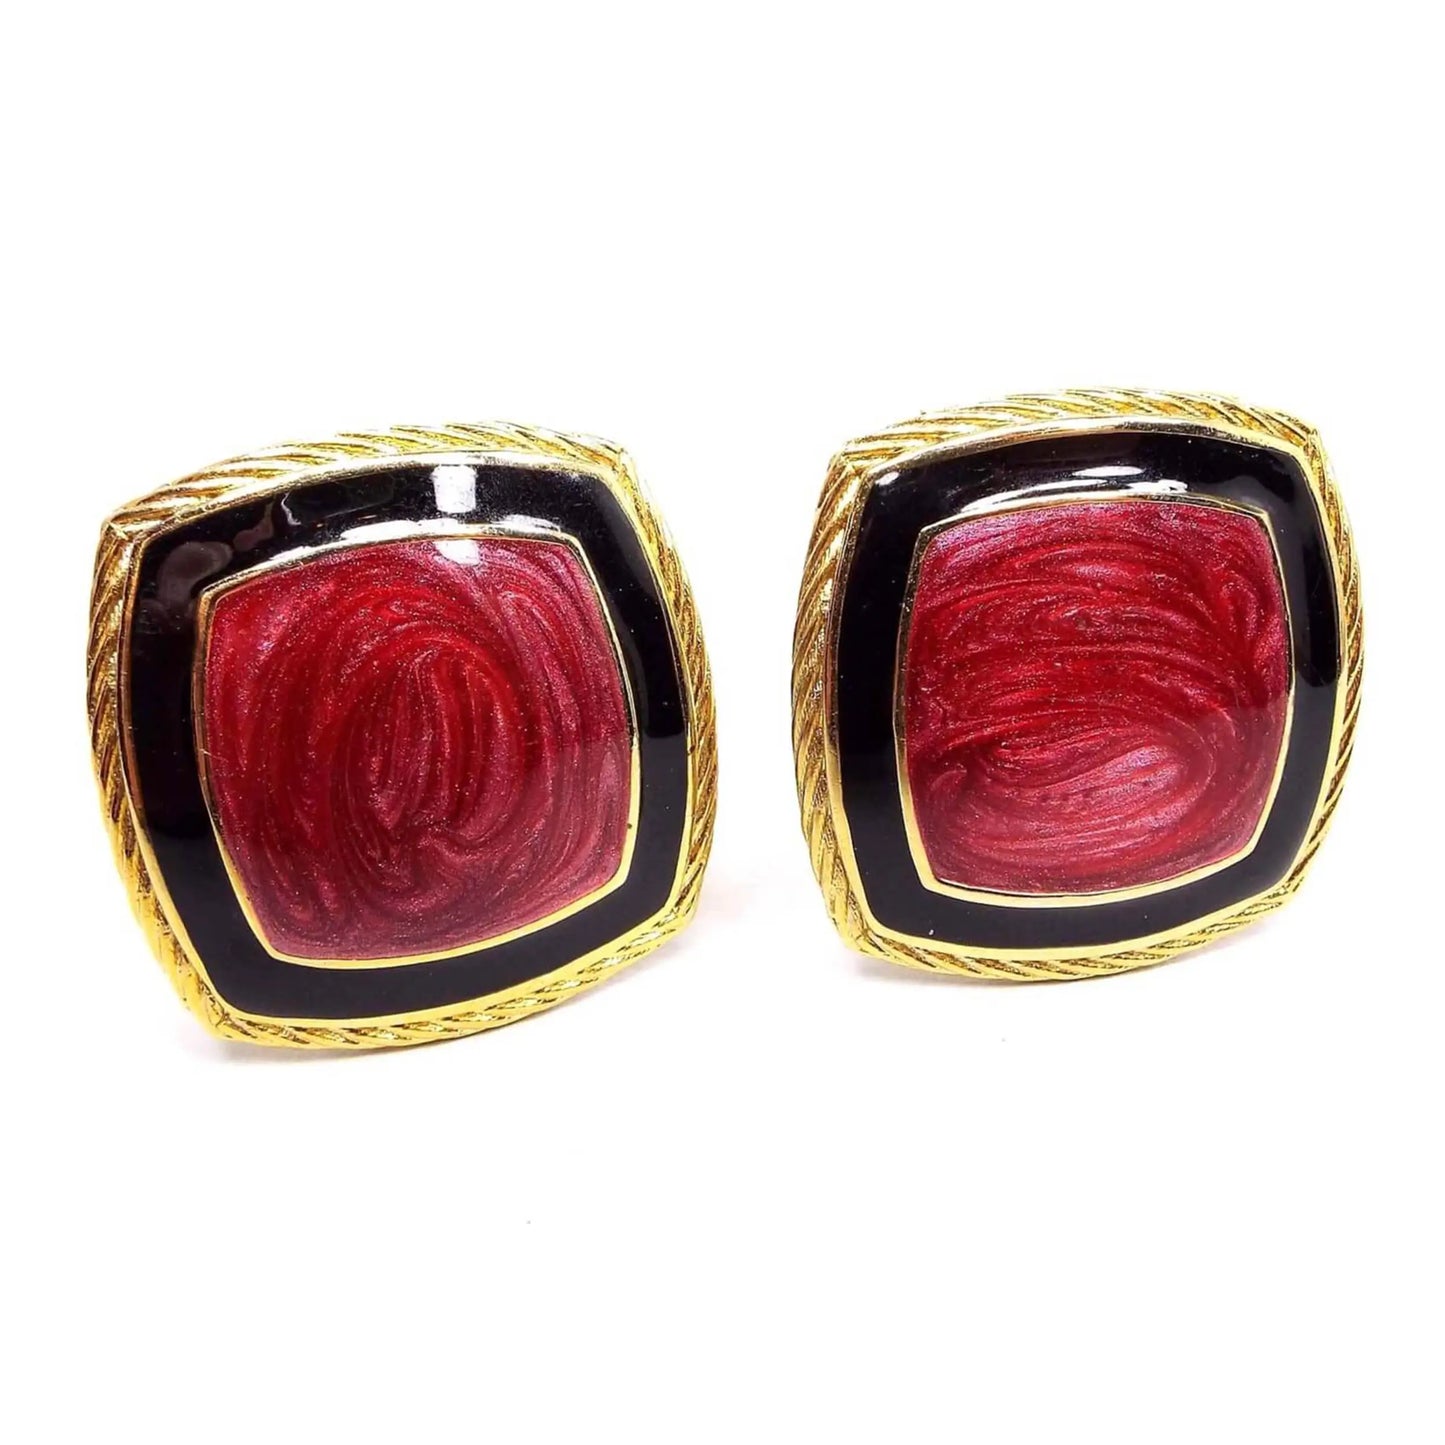 Front view of the retro vintage enameled clip on earrings. The metal is gold tone in color and has a twisted like edge around the square earrings. In the middle is pearly dark pink enamel with black enamel around the edge of it.